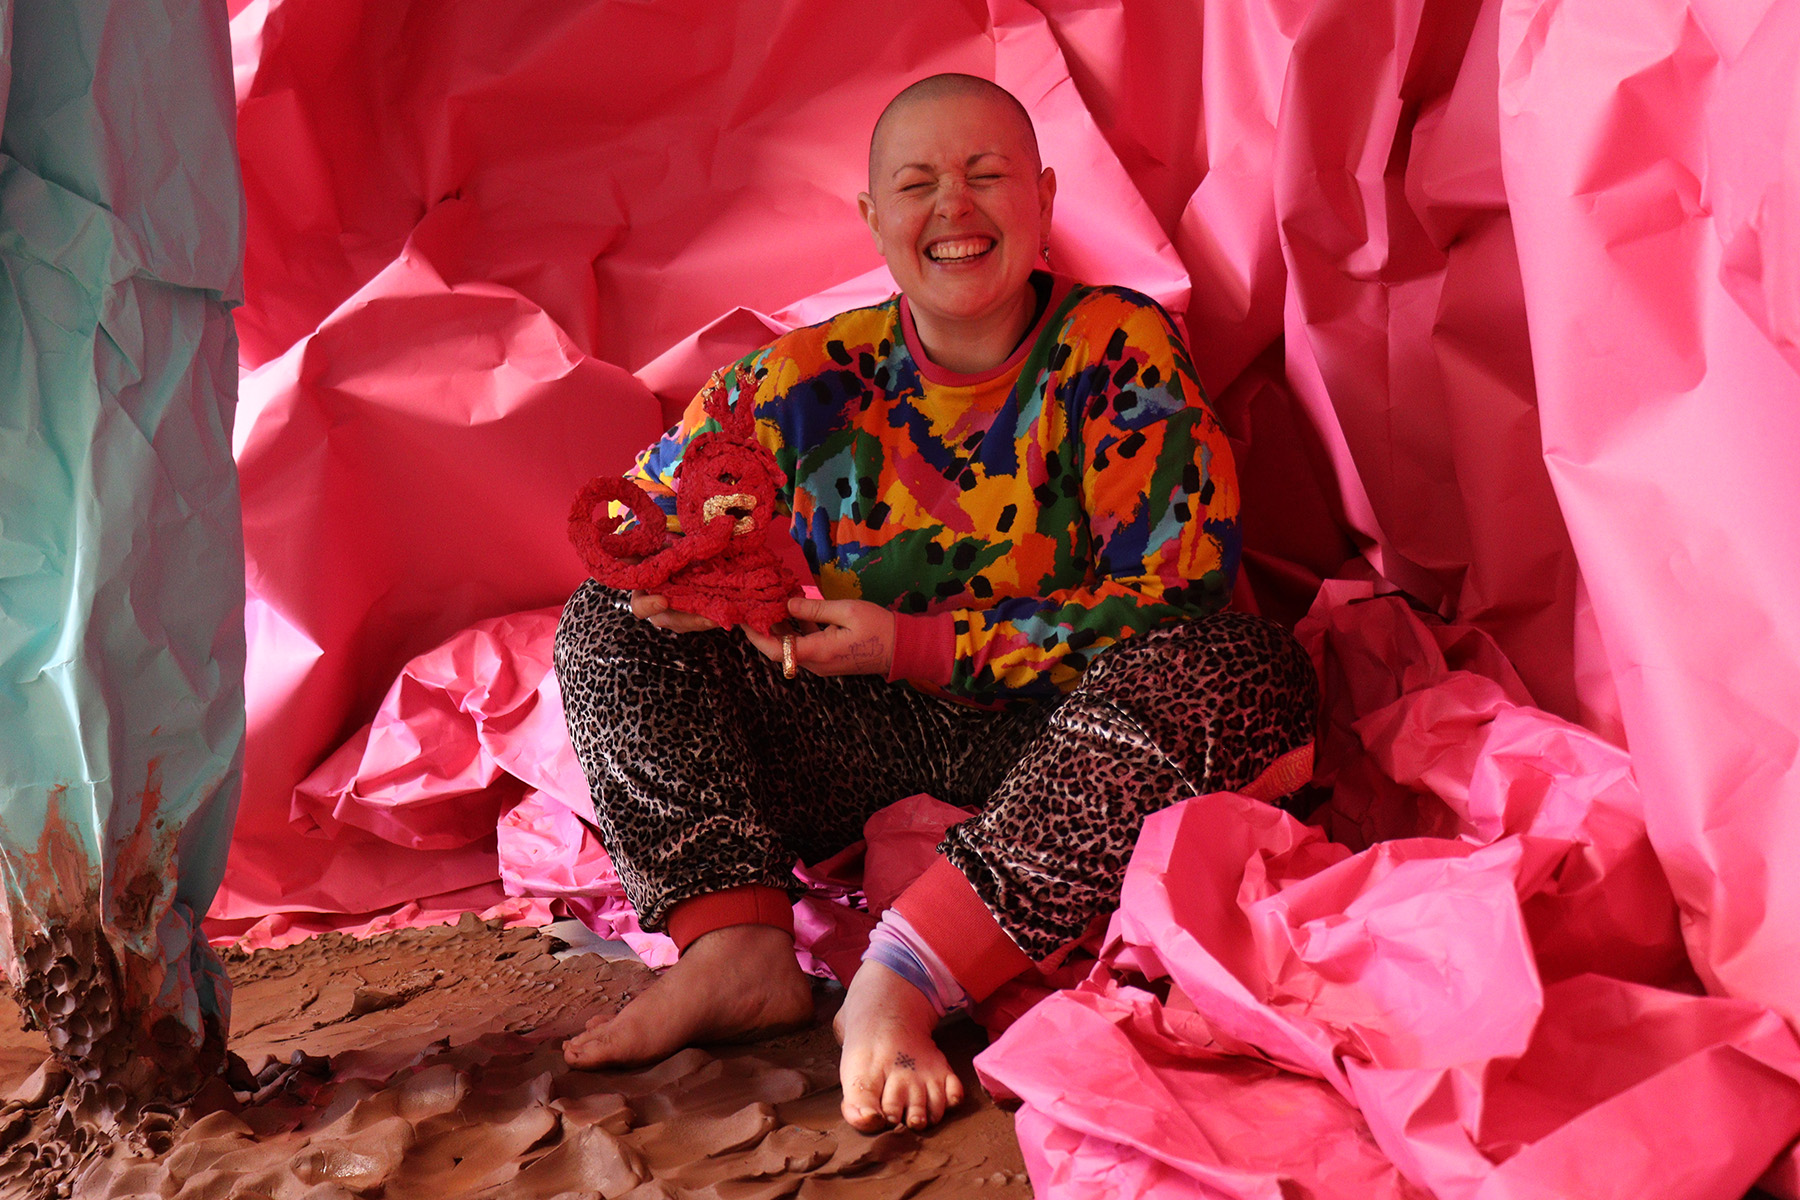 Colour photo, interior. Kitt, a white, shaven headed person with a wide crinkly nosed smile, sits amongst vast sheets of pink and mint green paper crumple to form a cave - like structure around them. on the floor is wet, raw terracotta clay in rolling folds.